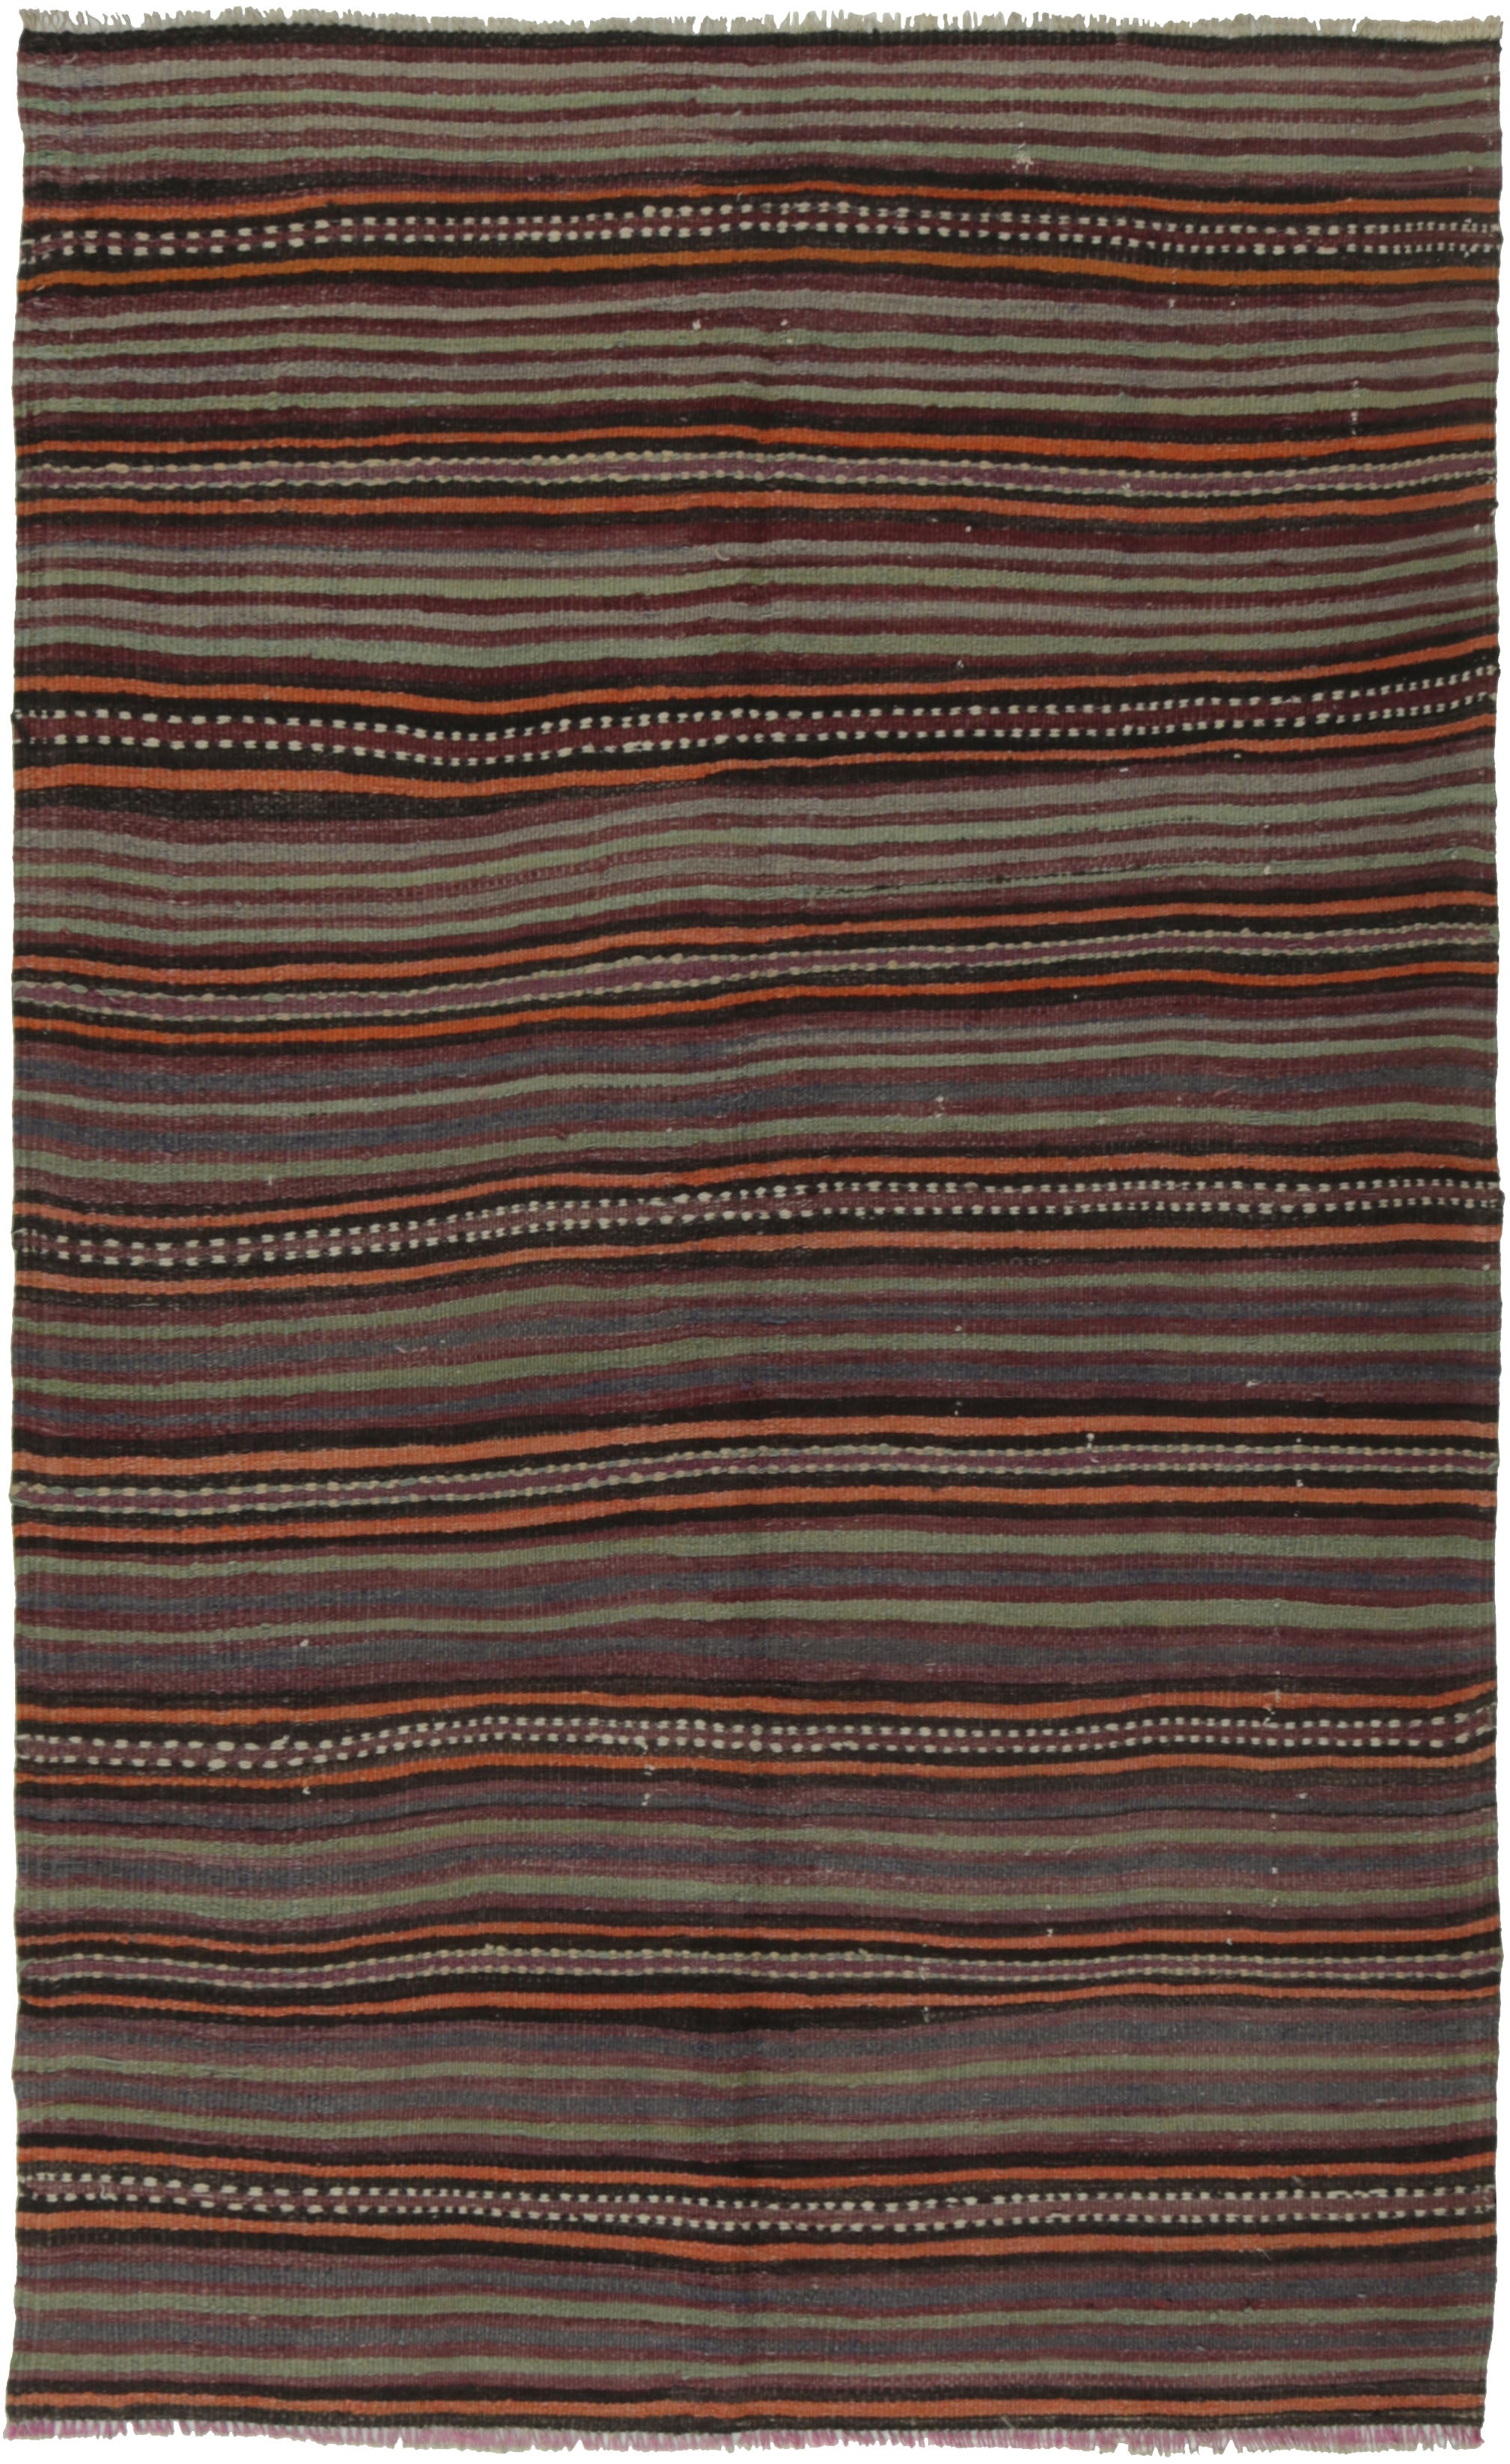 Authentic persian kelim flatweave rug with traditional stripe design in red, blue and black